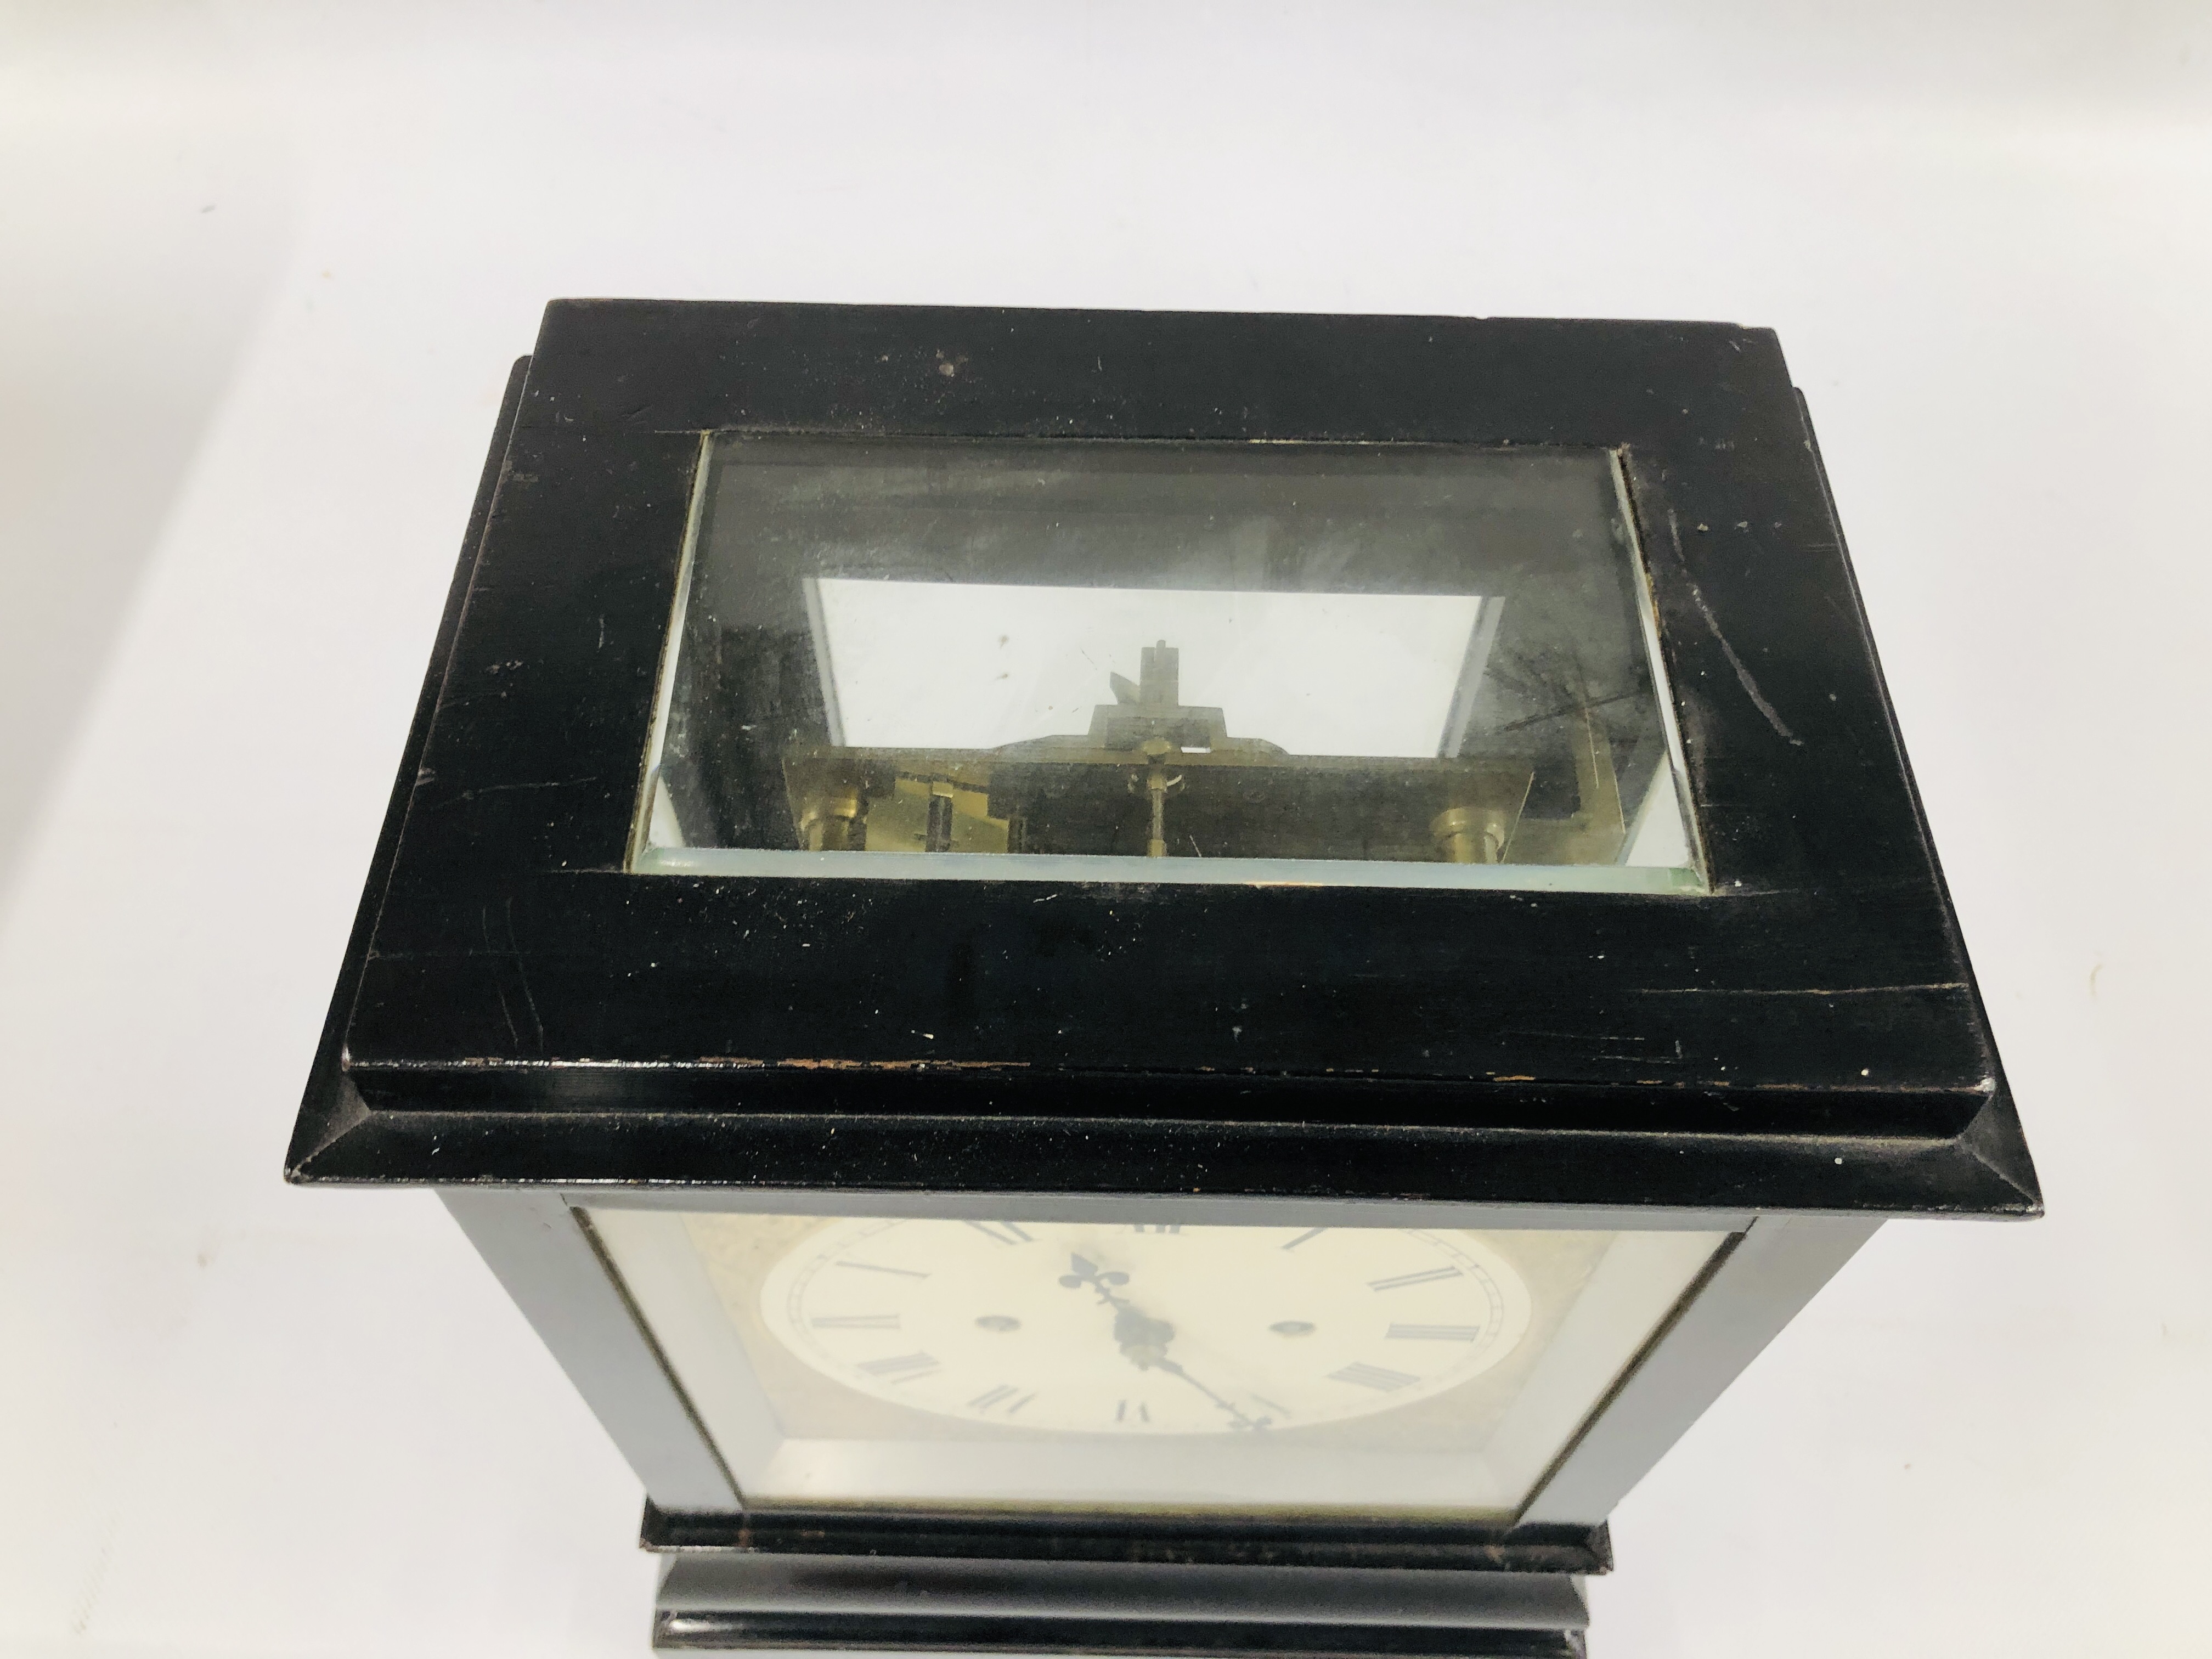 AN EDWARDIAN EBONISED MANTEL CLOCK, THE DOUBLE FUSEE MOVEMENT STRIKING ON A BELL, W 24CM, D 17CM, - Image 3 of 6